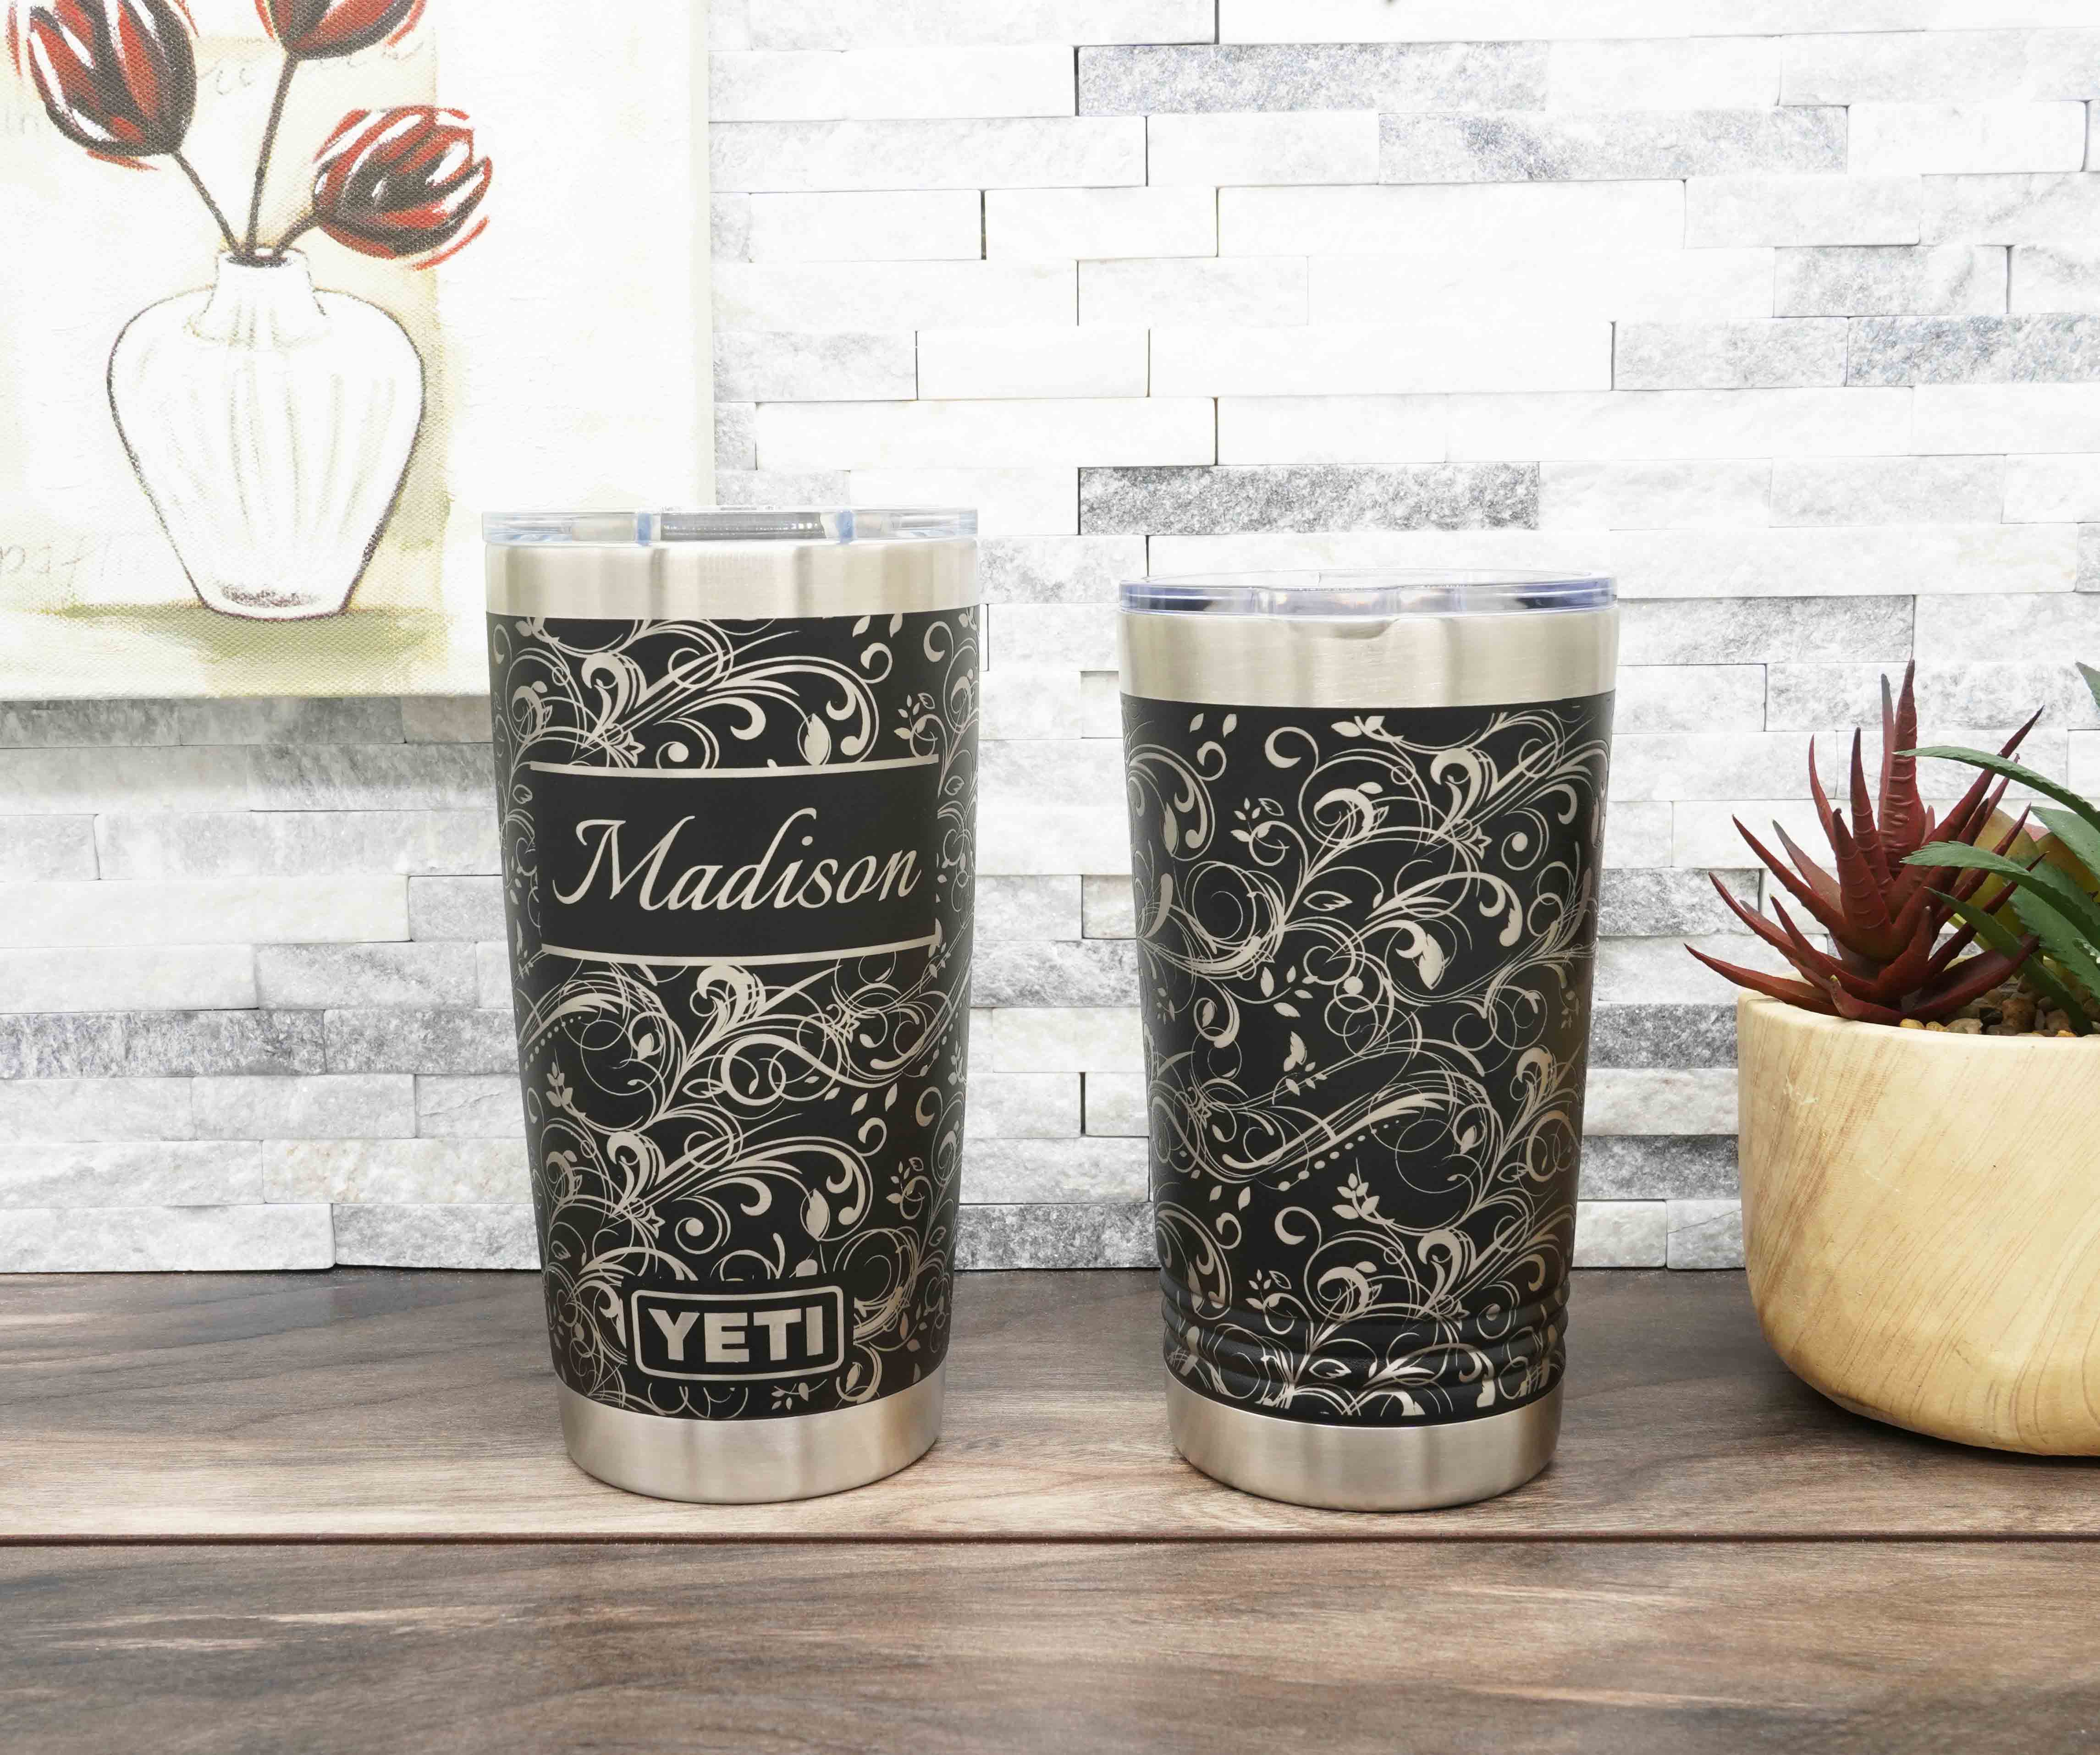 Yeti and Polar Camel tumblers laser engraved all the way around the tumbler with a fancy flourish pattern for a 360 degree full wrap around design. Personalization optional.